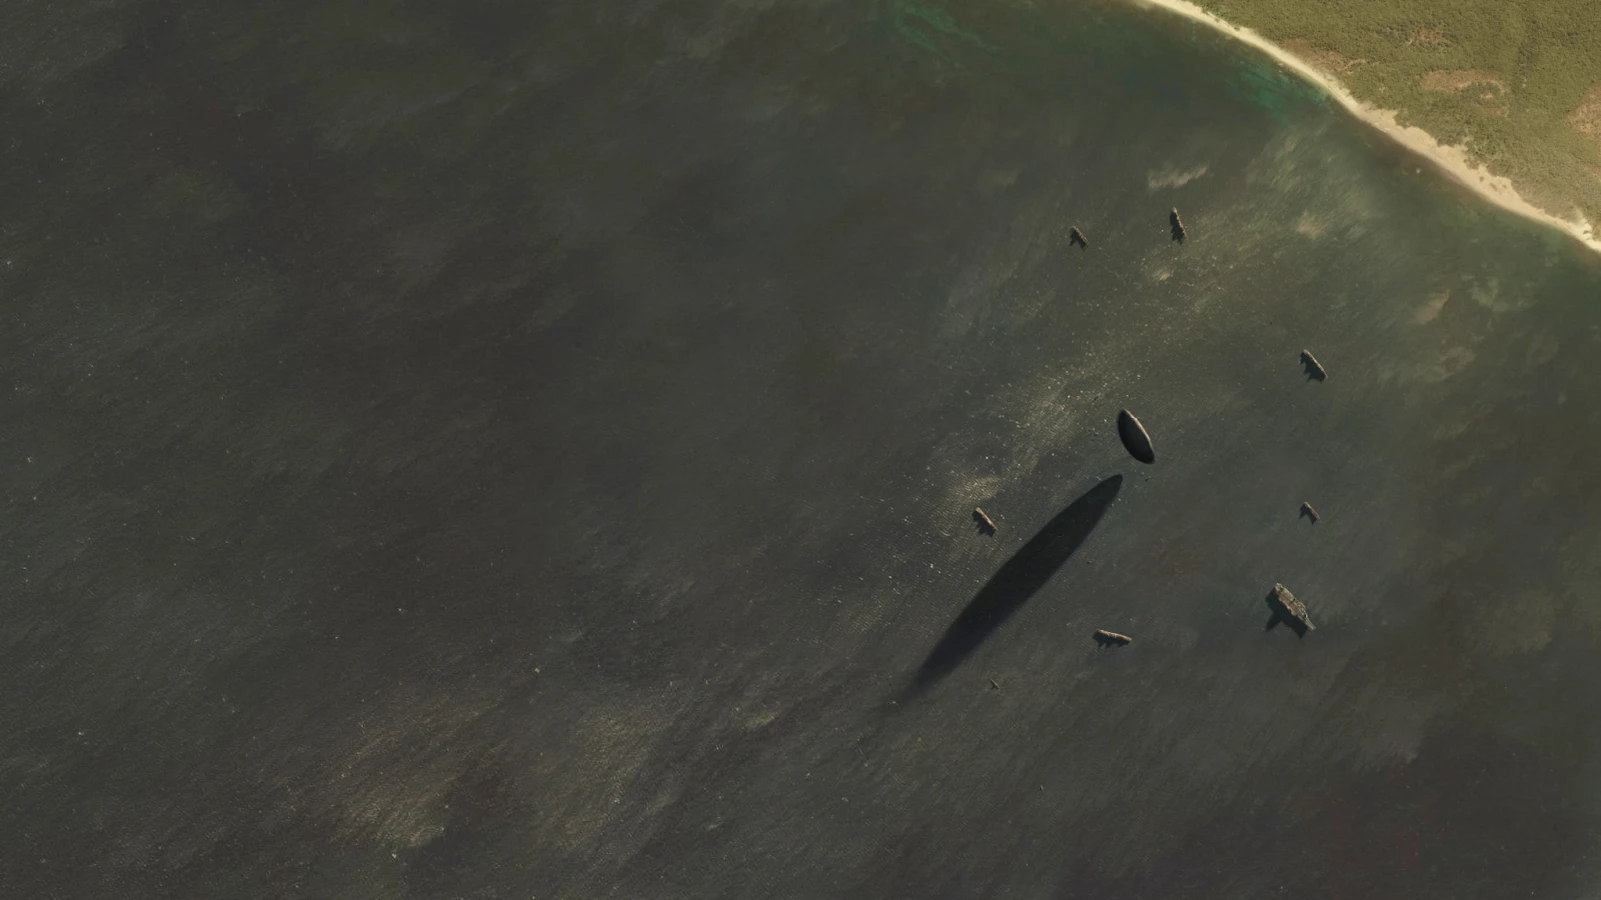  Arrival aerial view spaceship in Russia Raynault vfx 